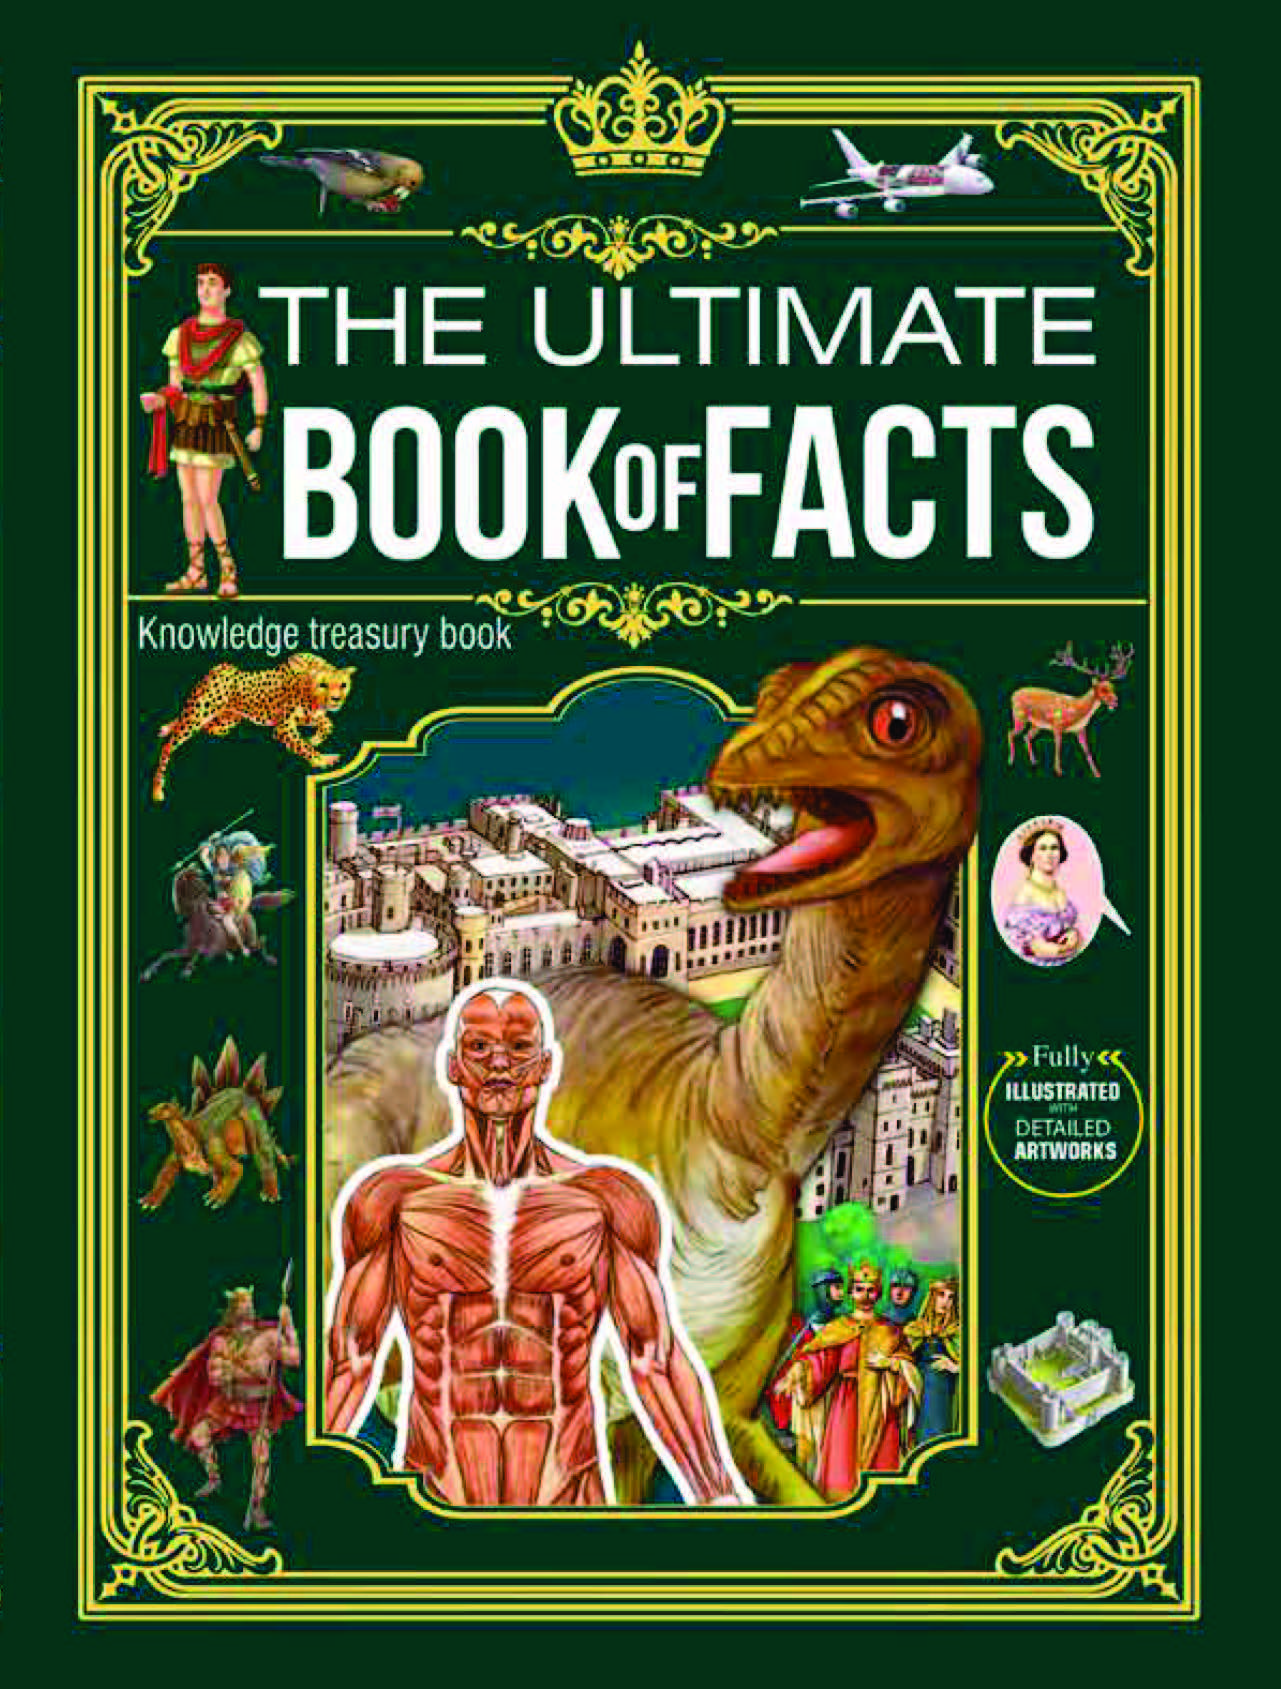 THE ULTIMATE BOOK OF FACTS